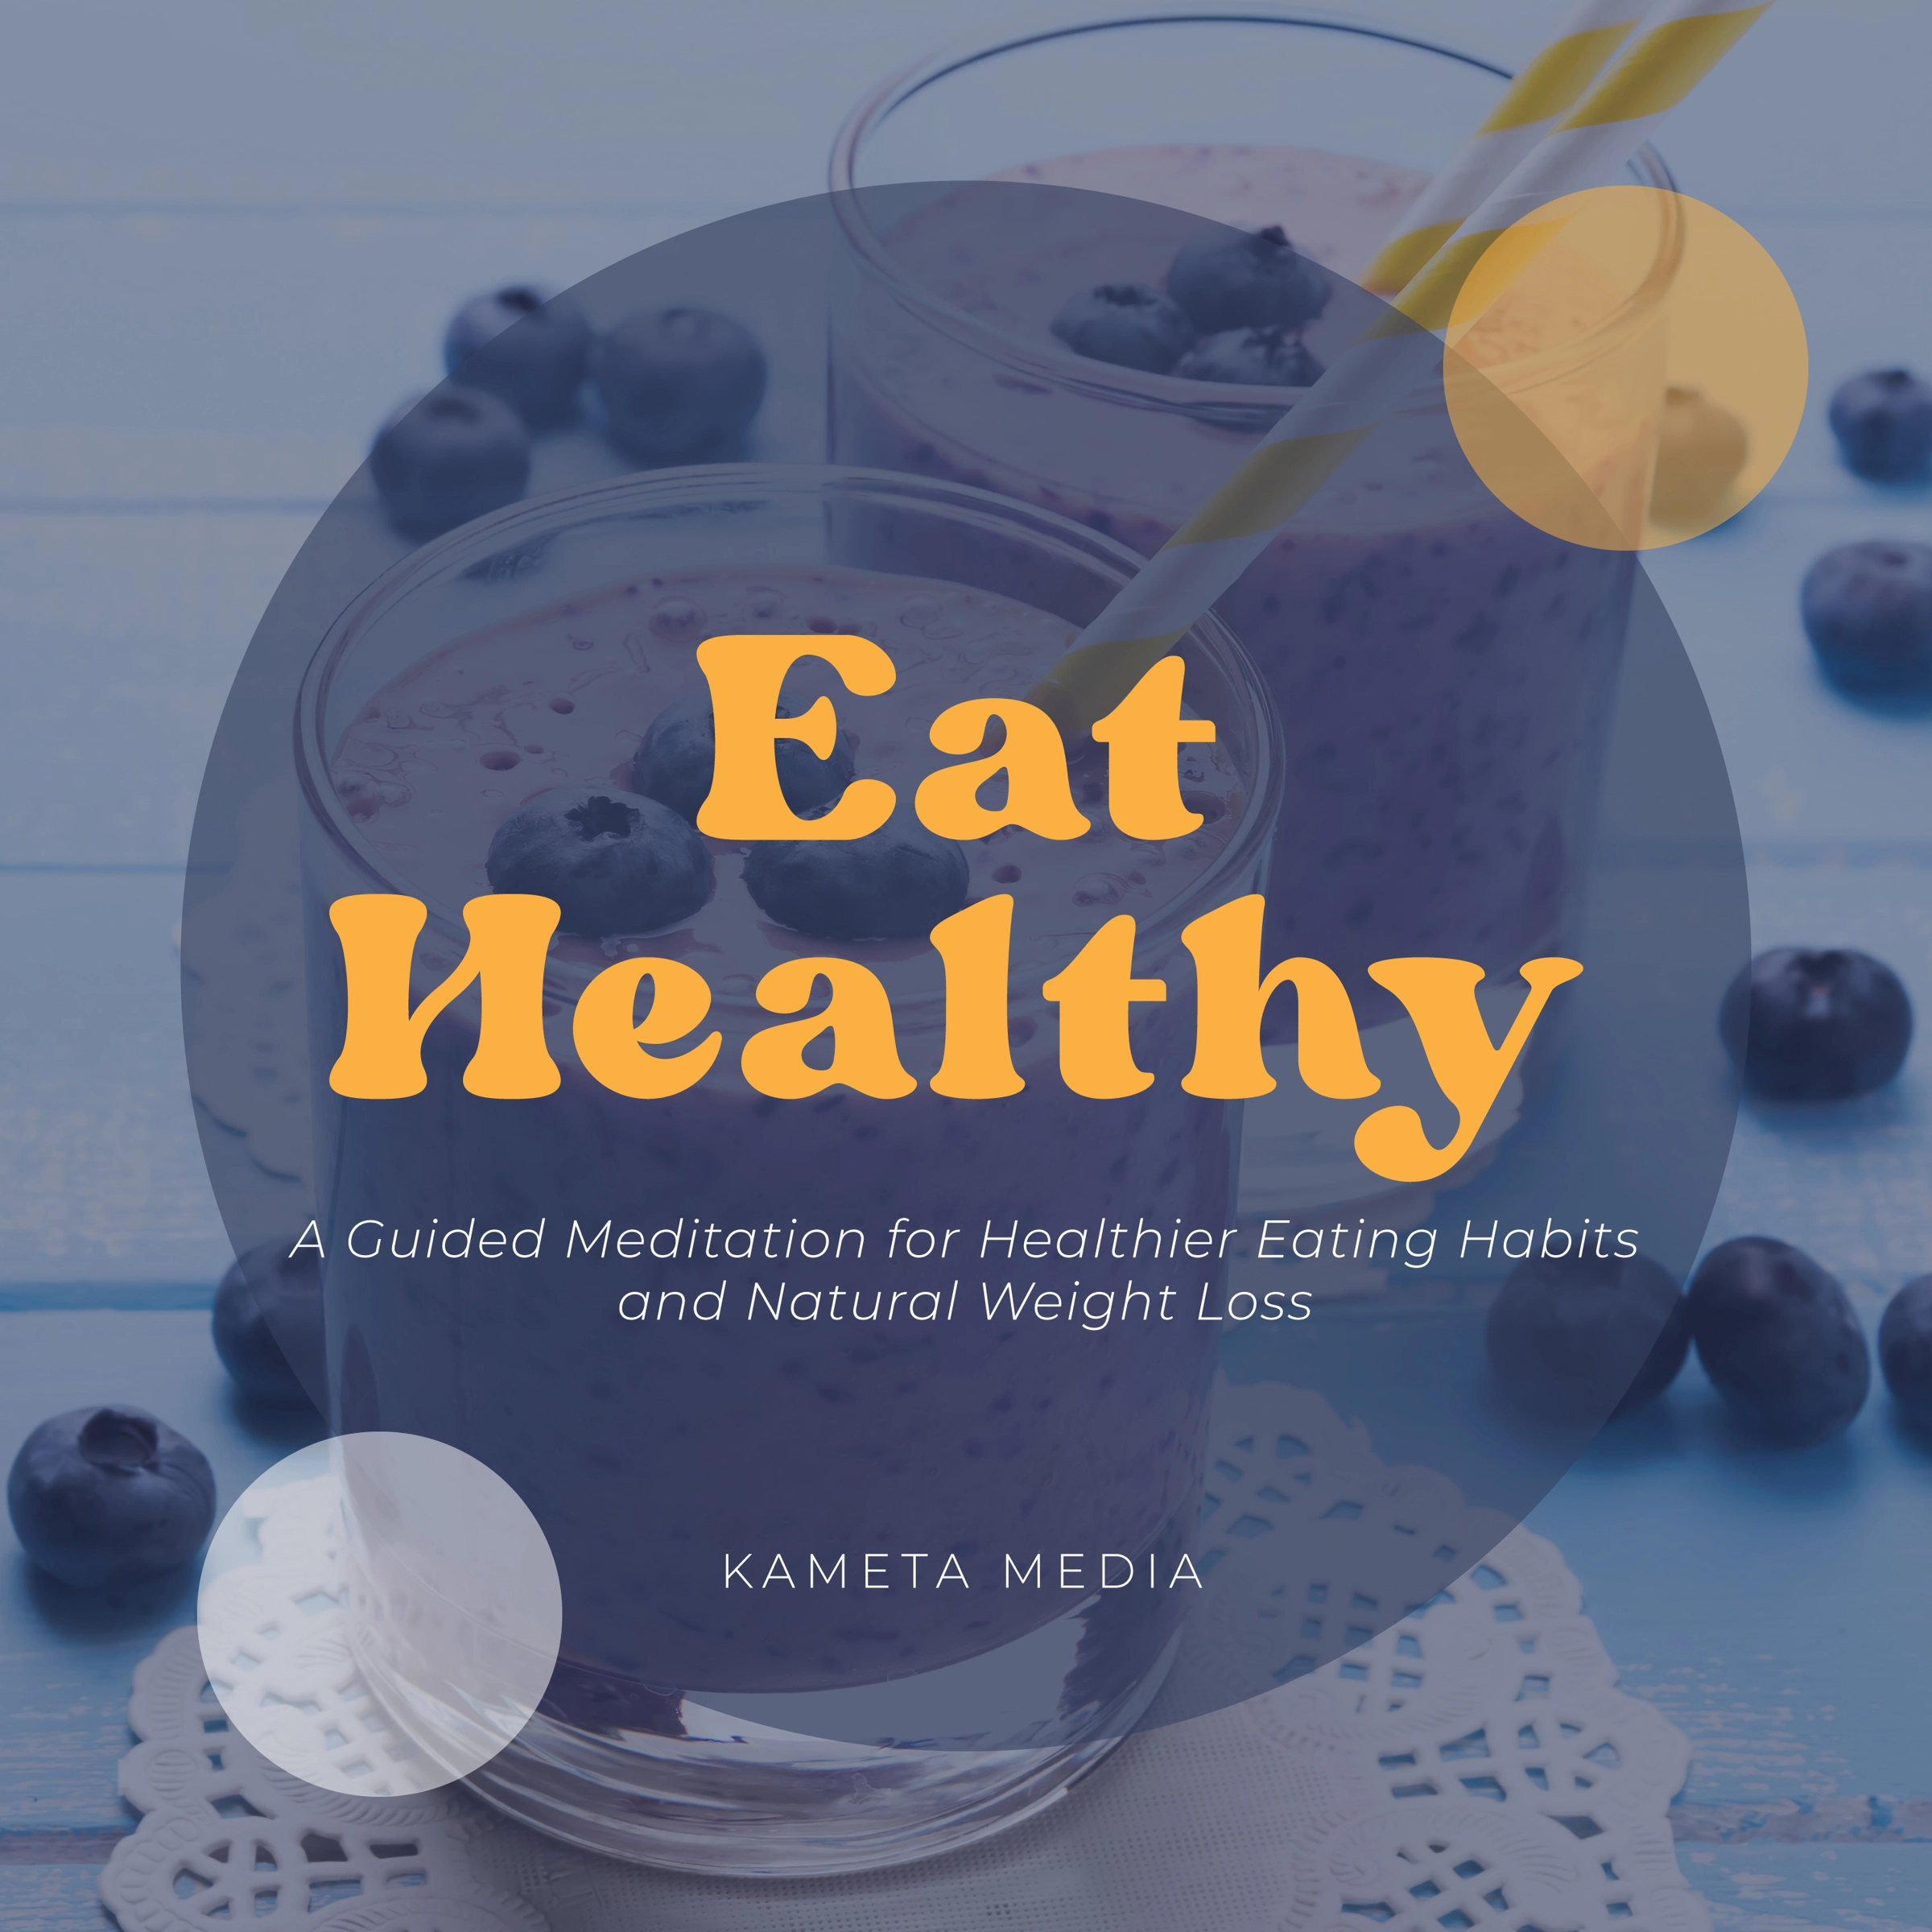 Eat Healthy: A Guided Meditation for Healthier Eating Habits and Natural Weight Loss Audiobook by Kameta Media